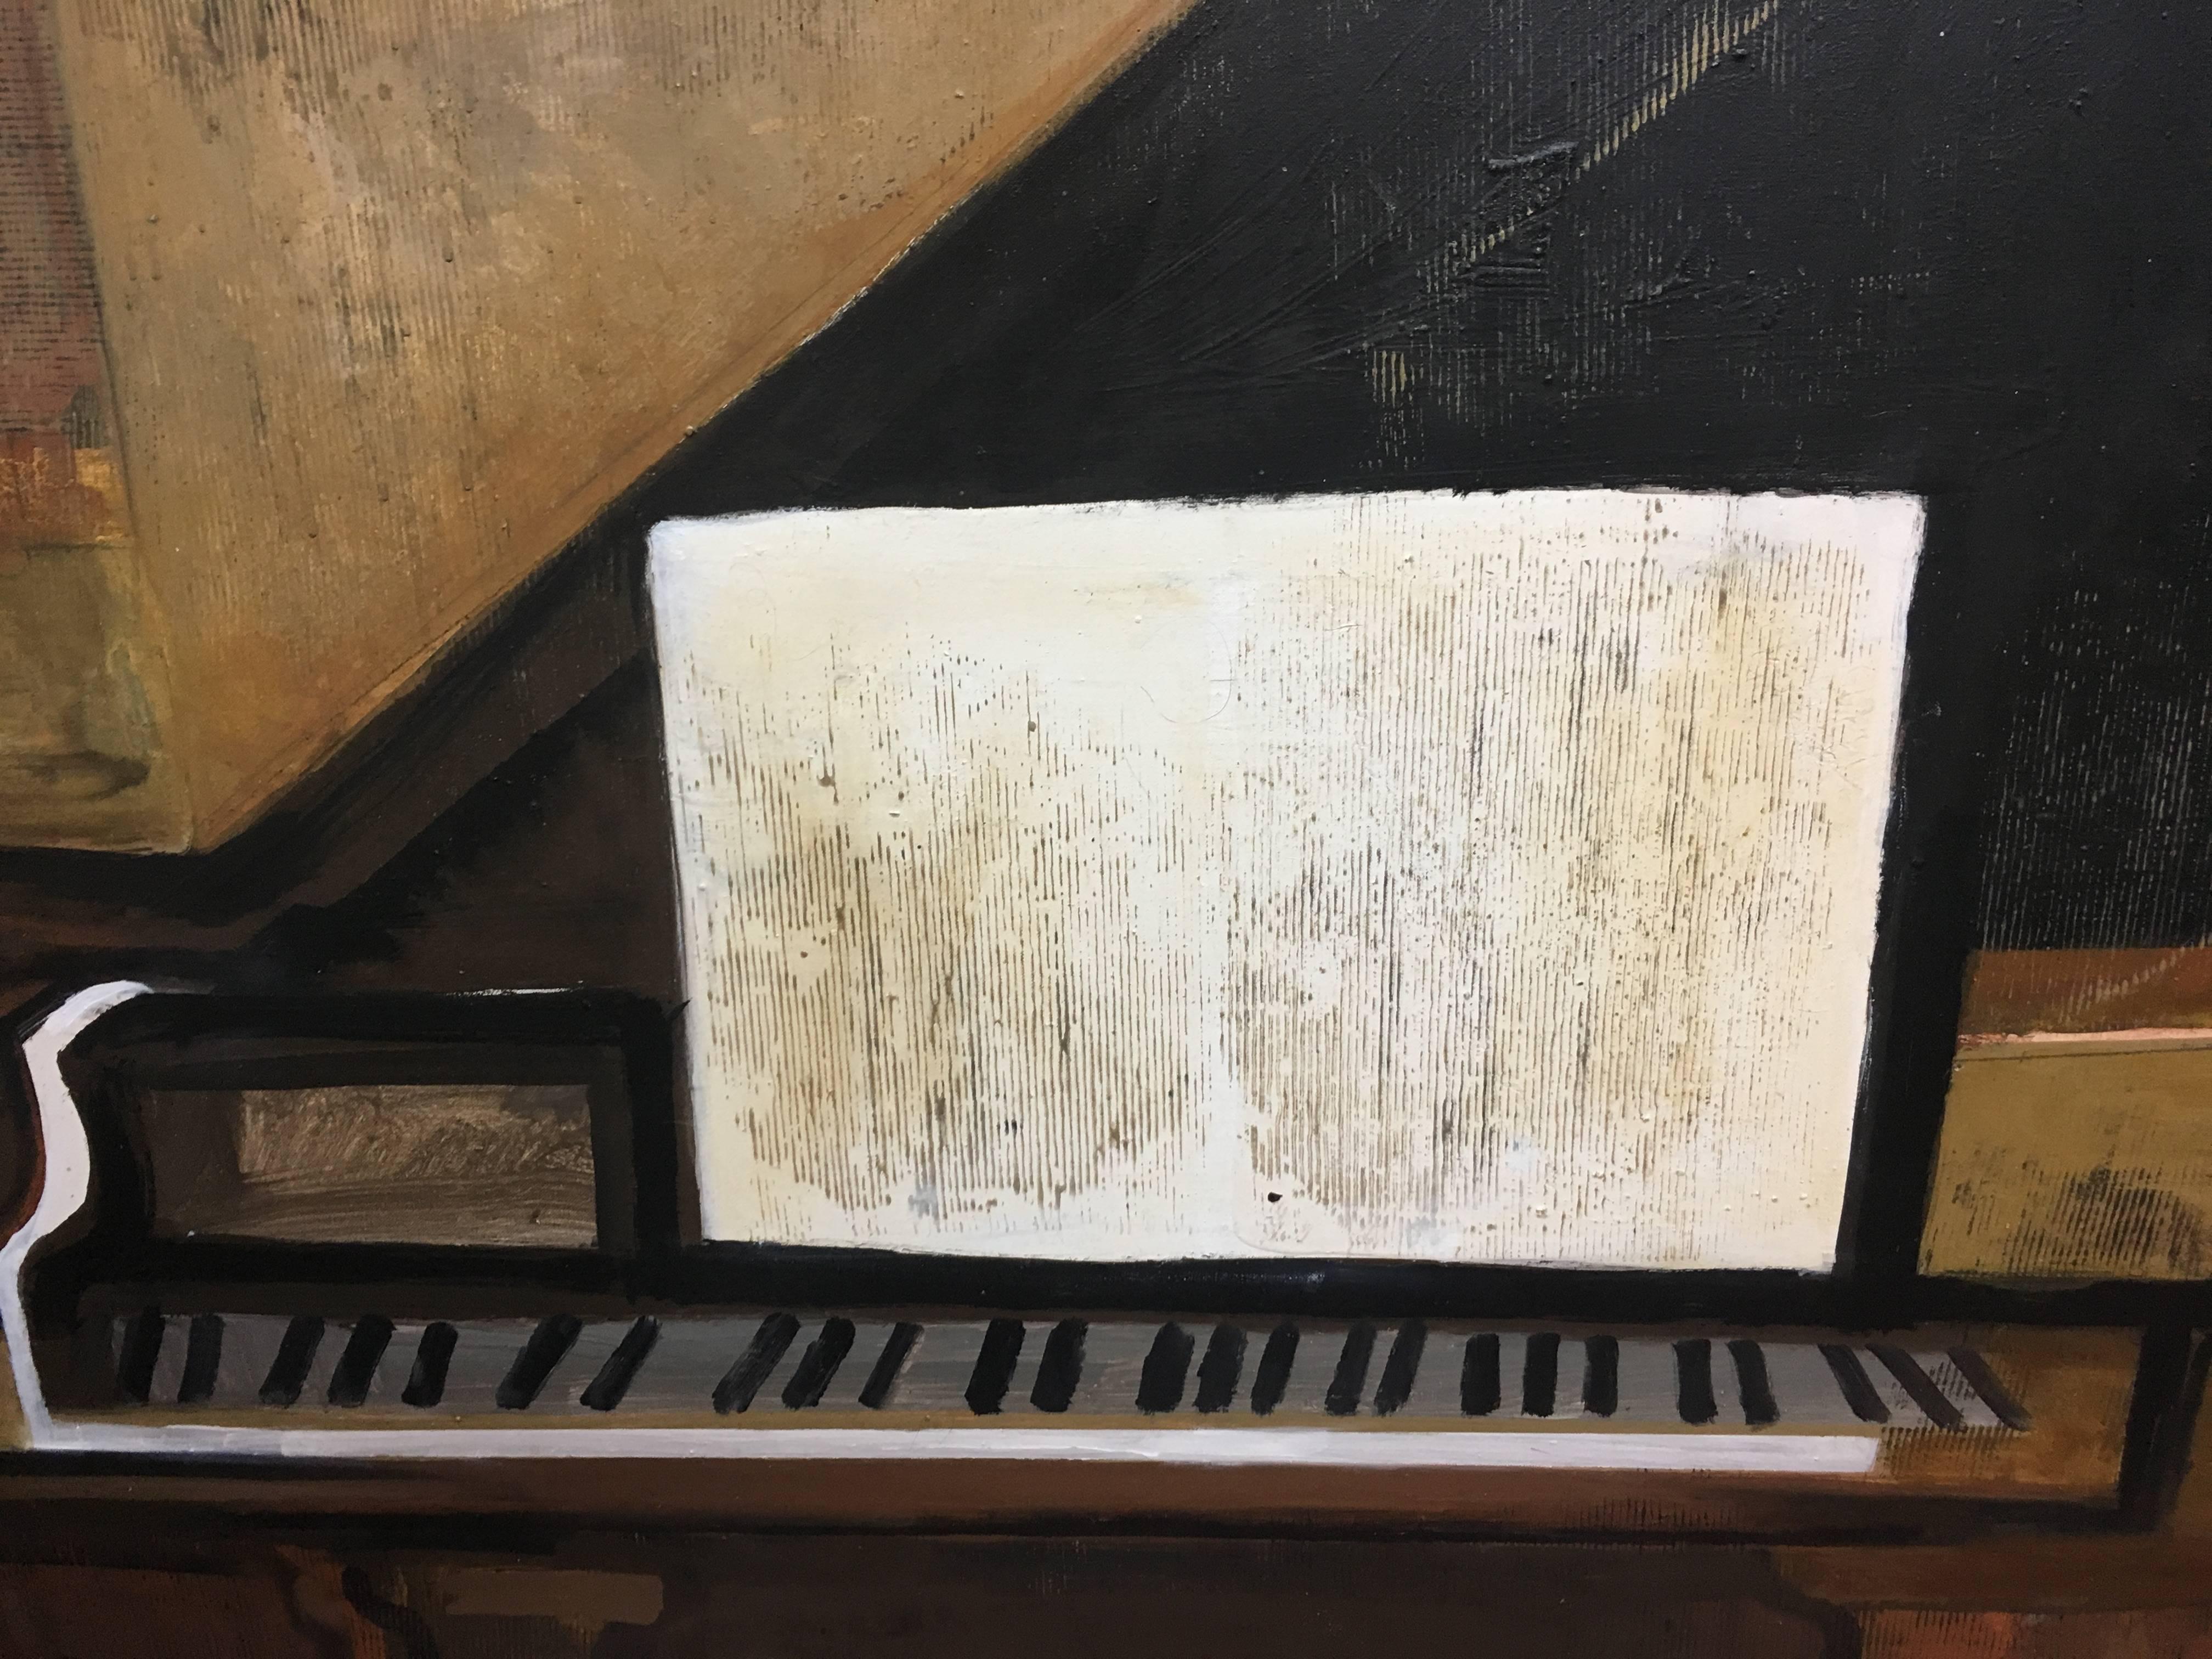 Piano and shett II original expressionist acrylic painting
RAVENTÓS Mª Assumpció – (San Sadurní d’Anoia, Barcelona 1930).
Raventos trained at the elite Sant Jordi School of Fine Arts in Barcelona.
Raventós expanded her studies in etching and